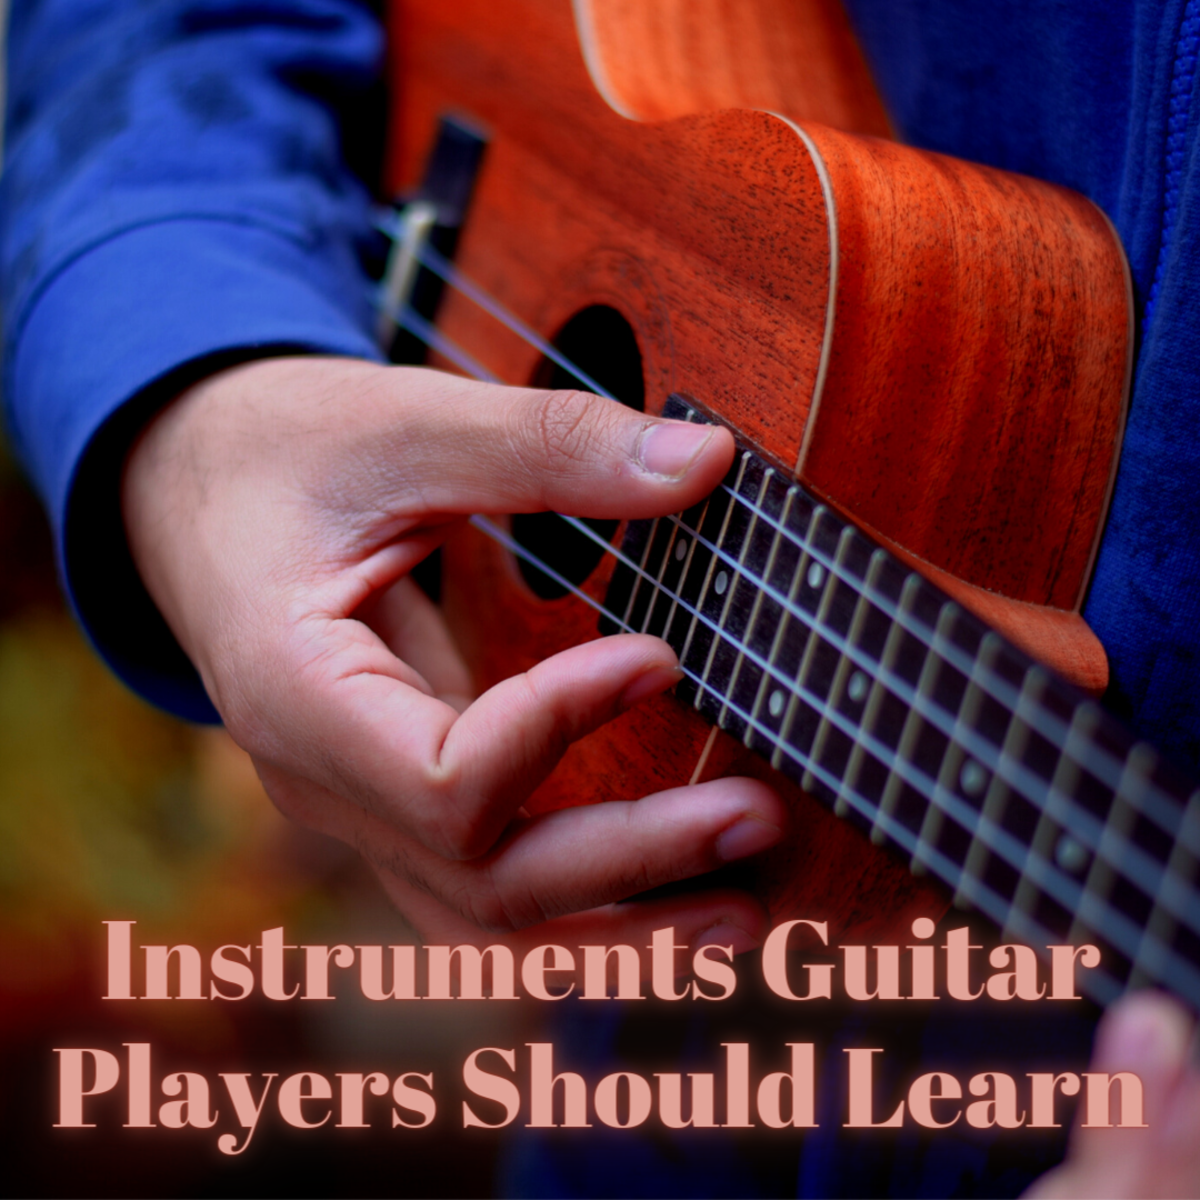 If you're a guitar player looking for a new instrument to play, you might want to consider one of these options!